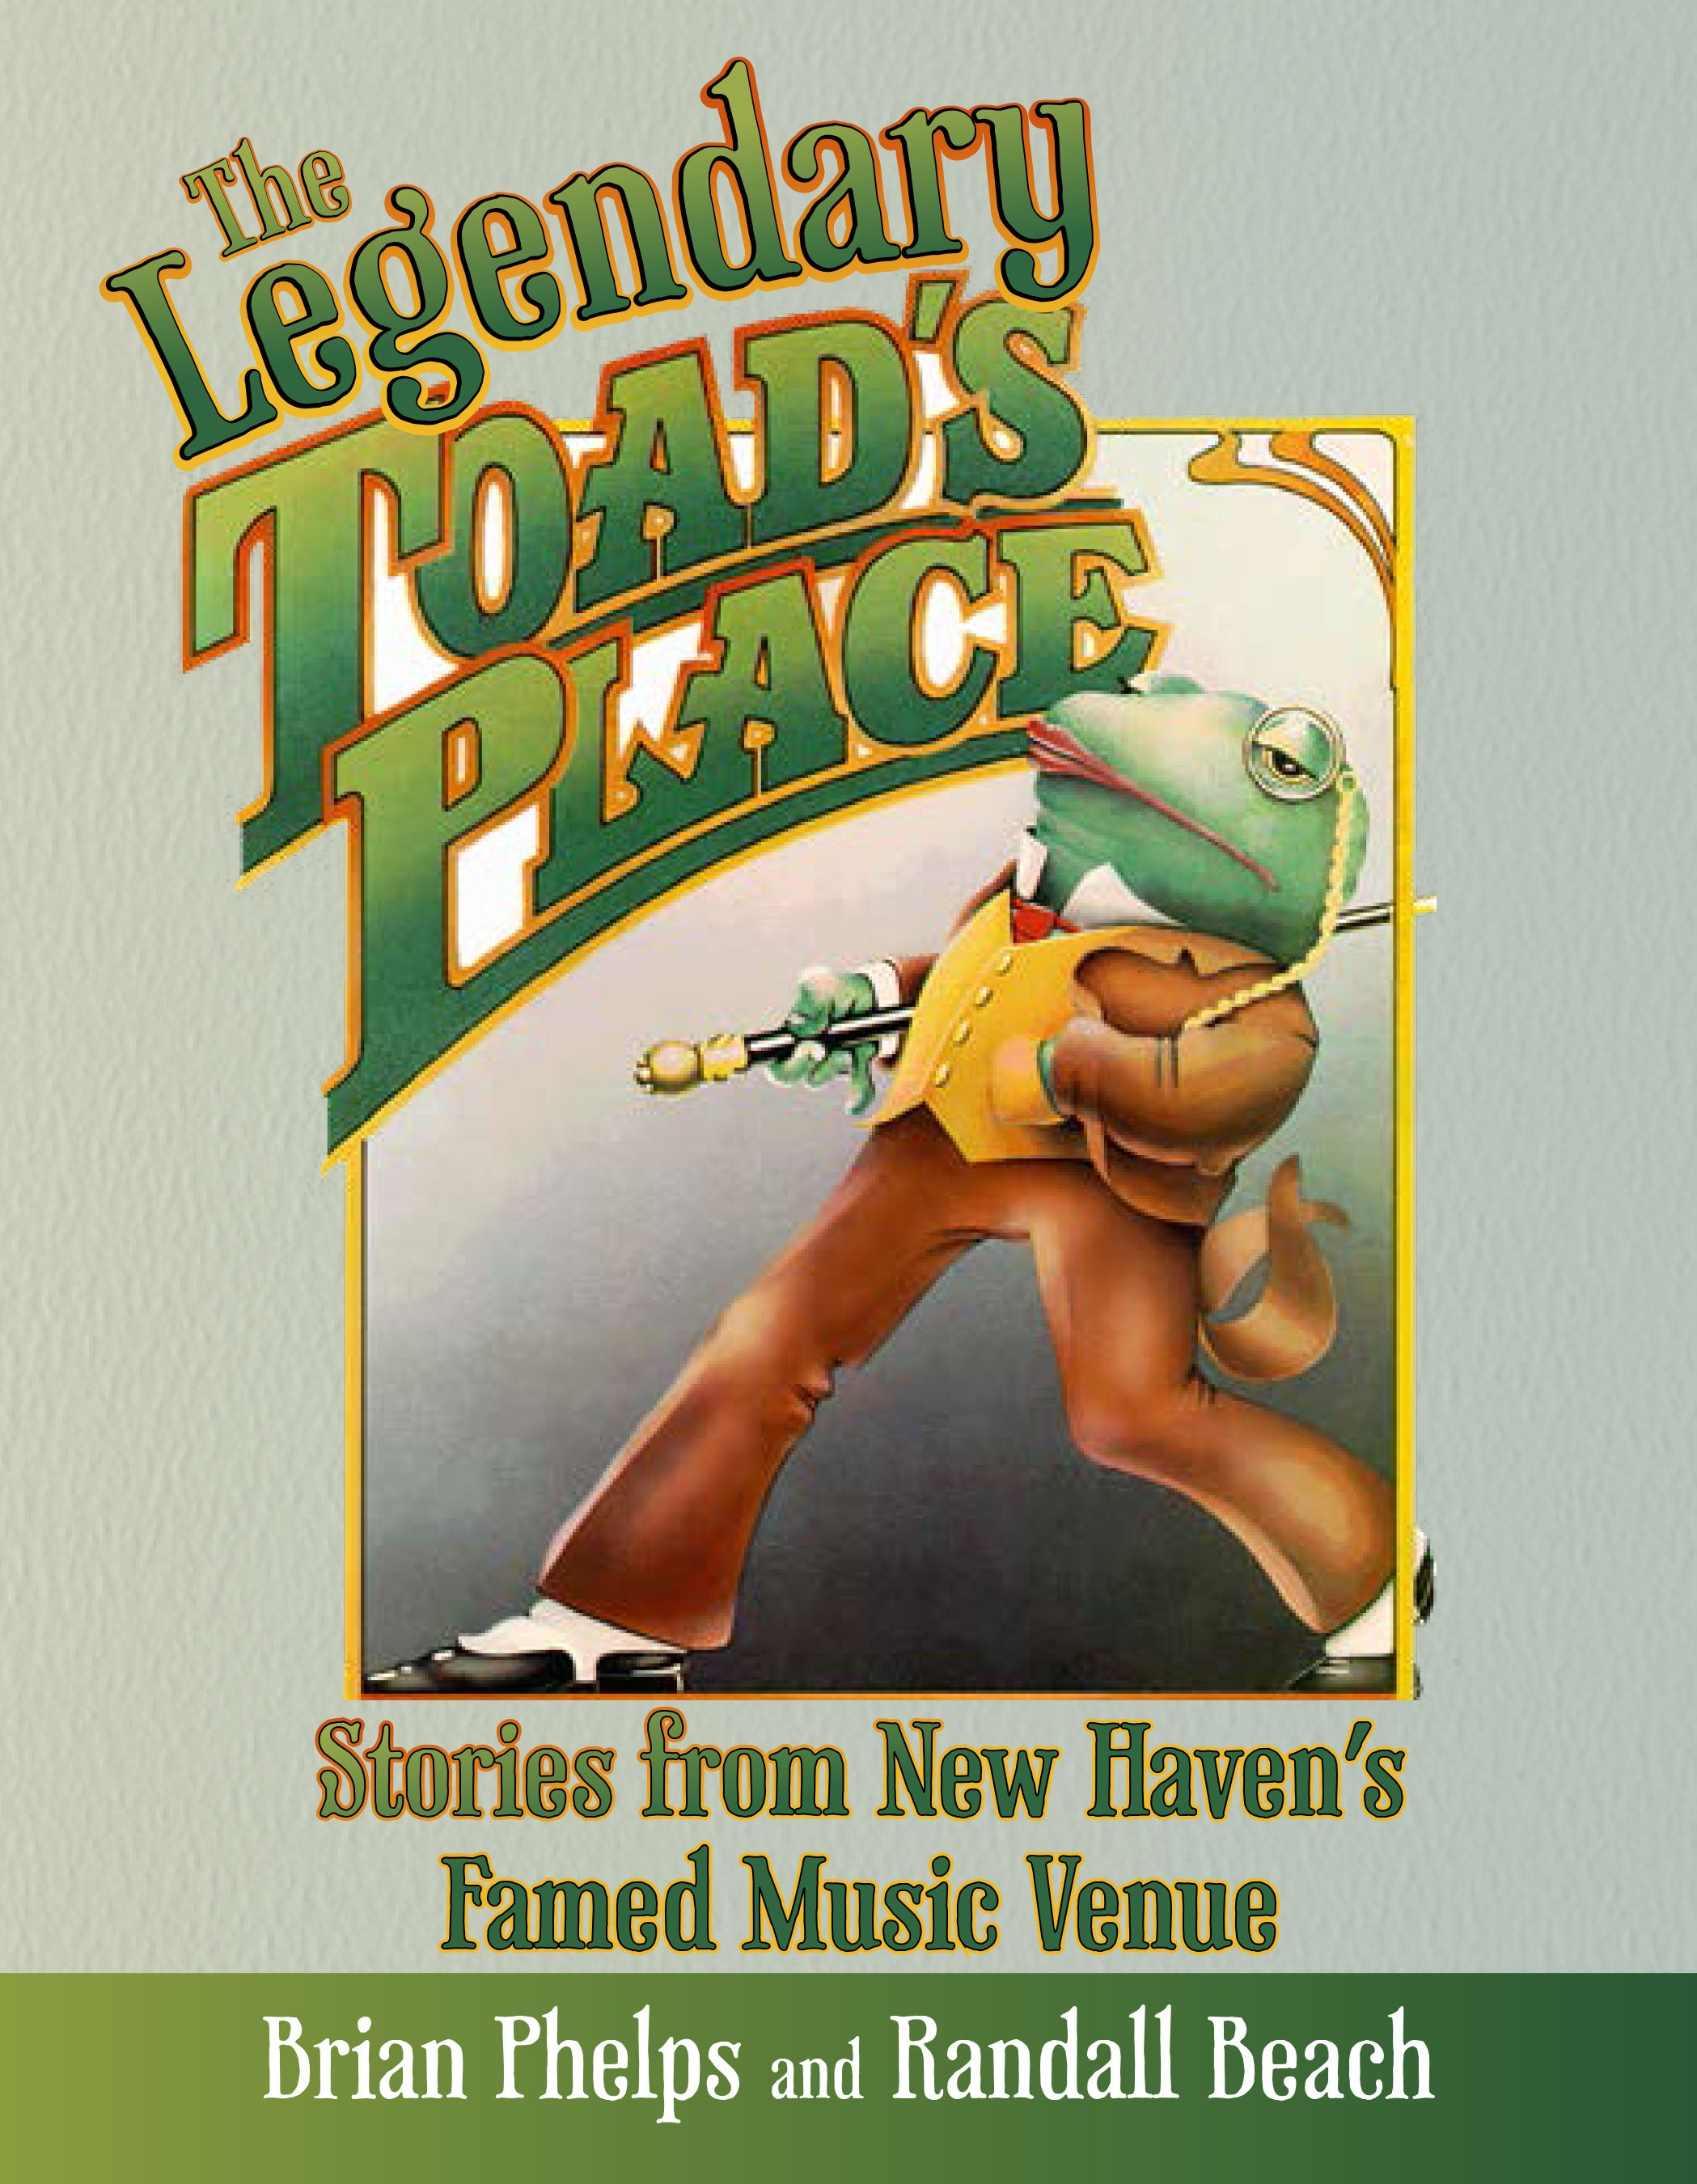 The Legendary Toad's Place Book